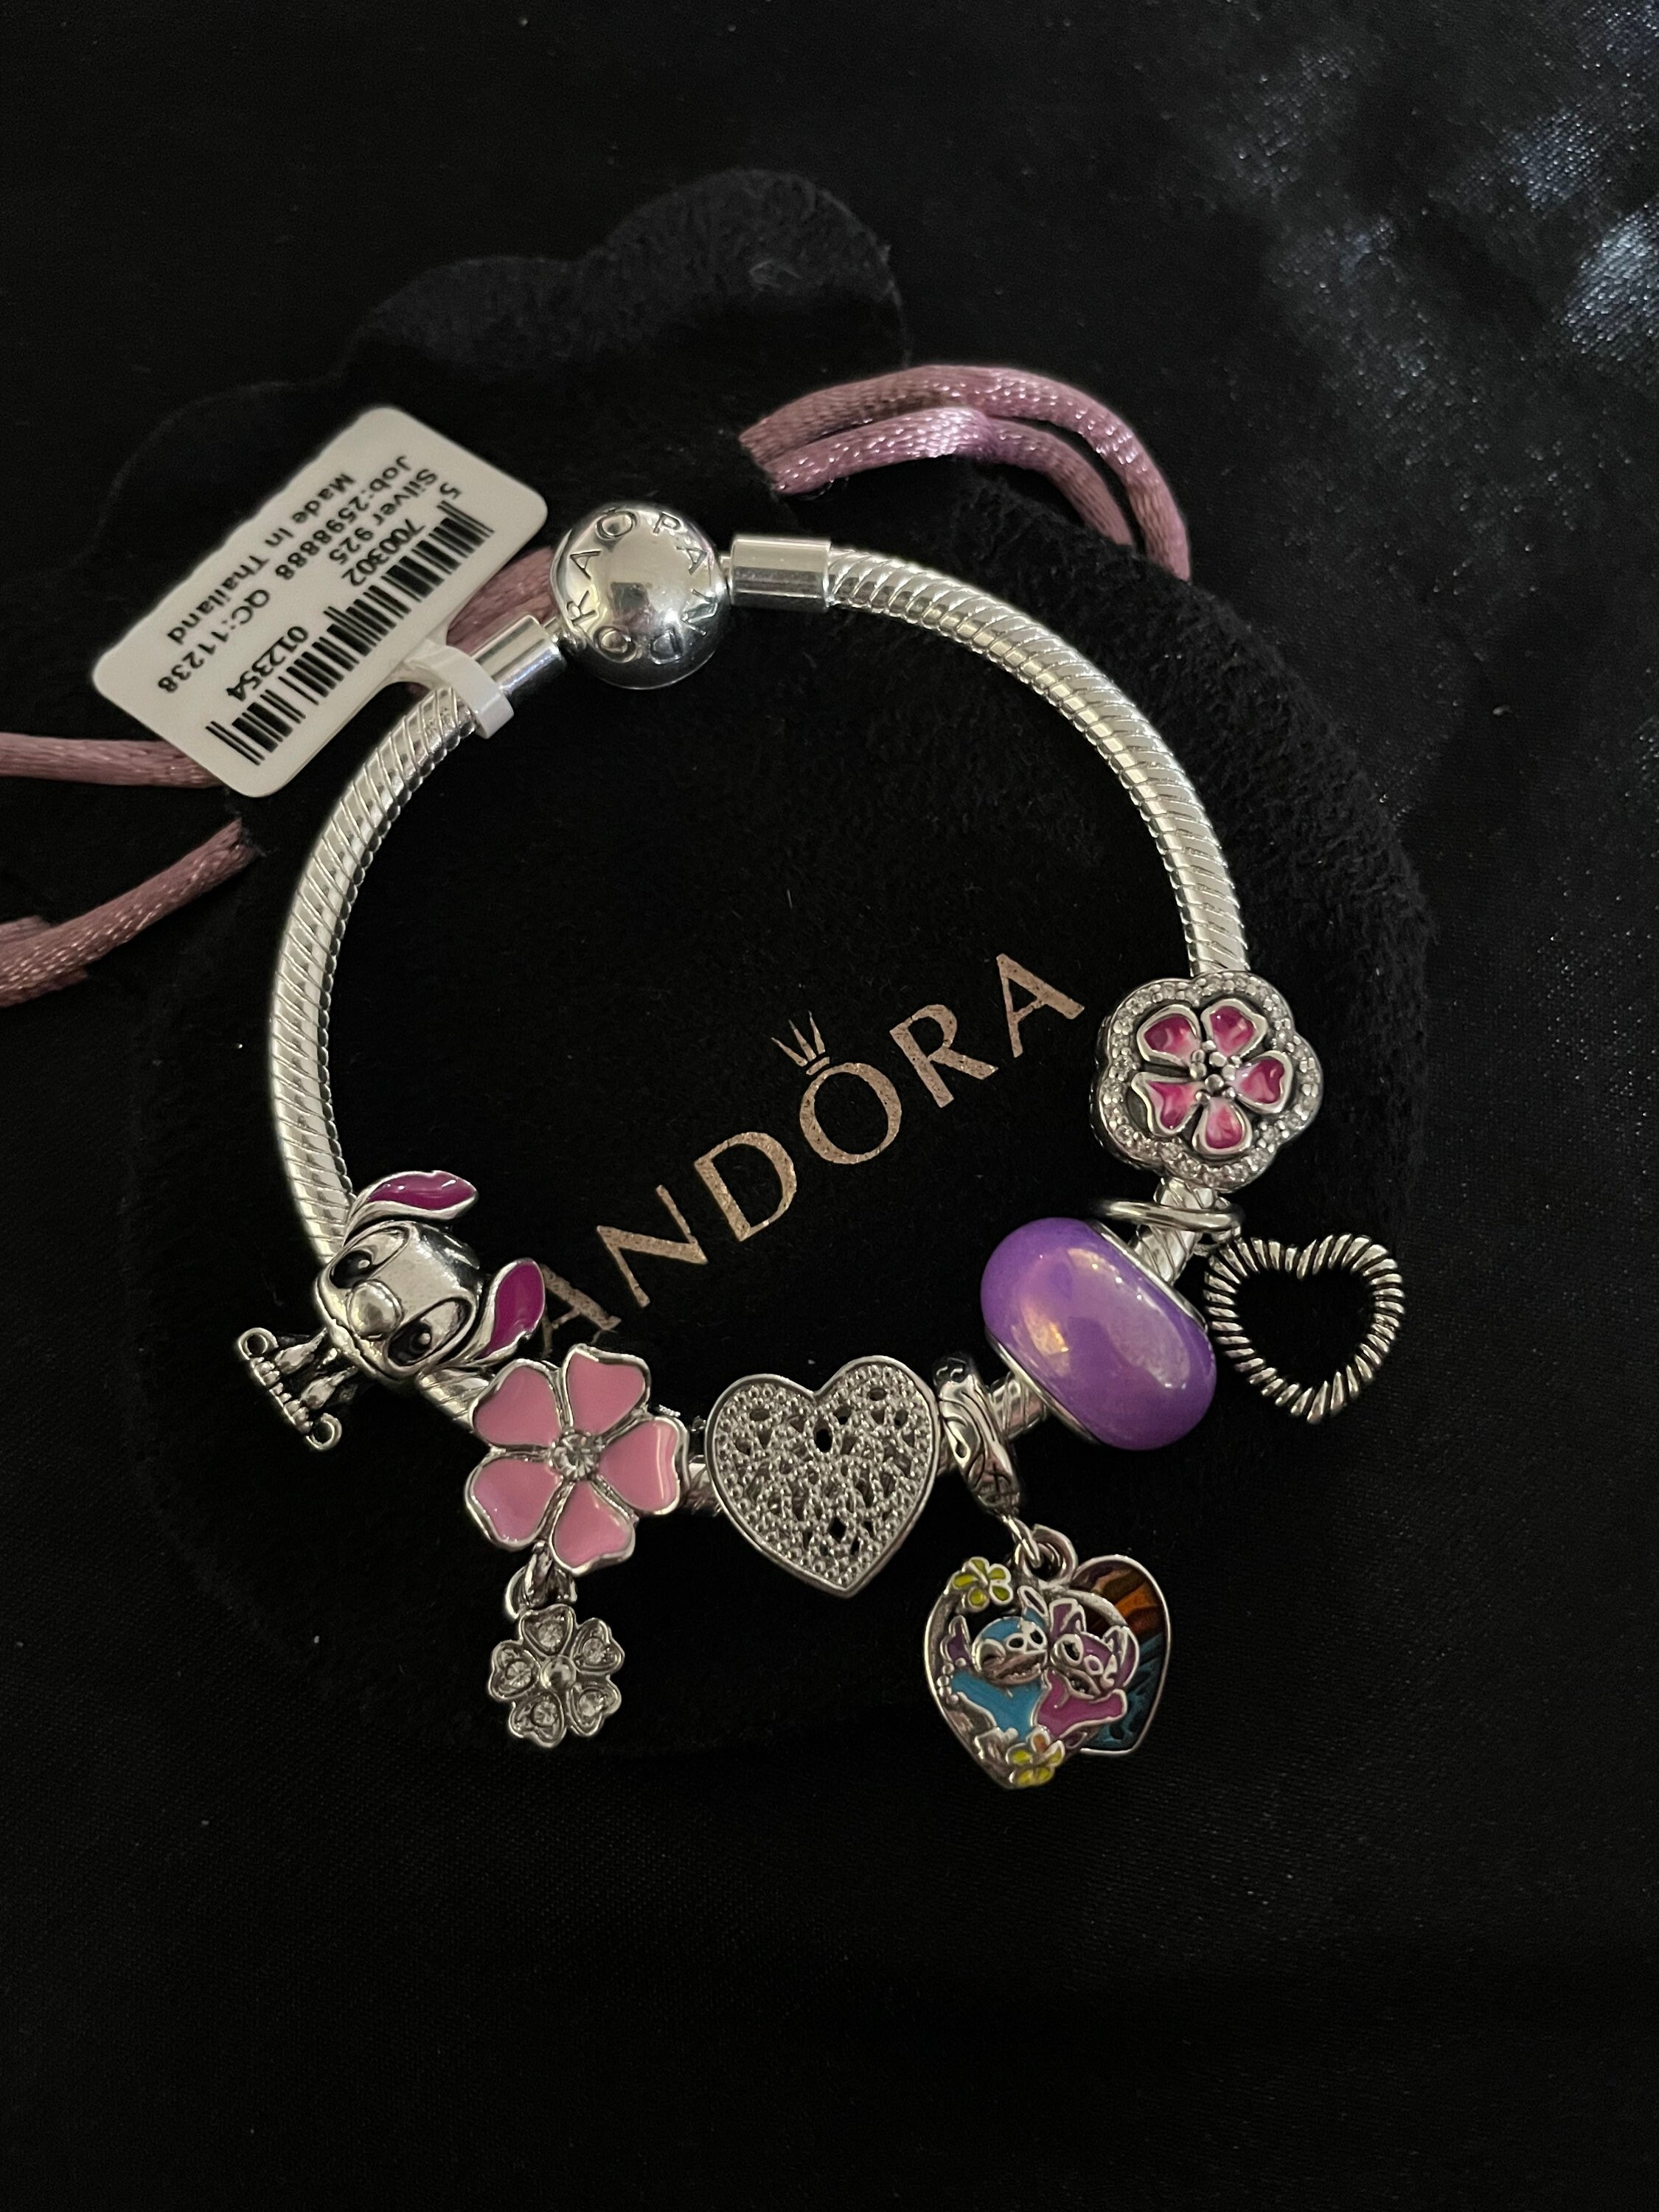 Pandora Bracelet With Character Themed Charms - Etsy